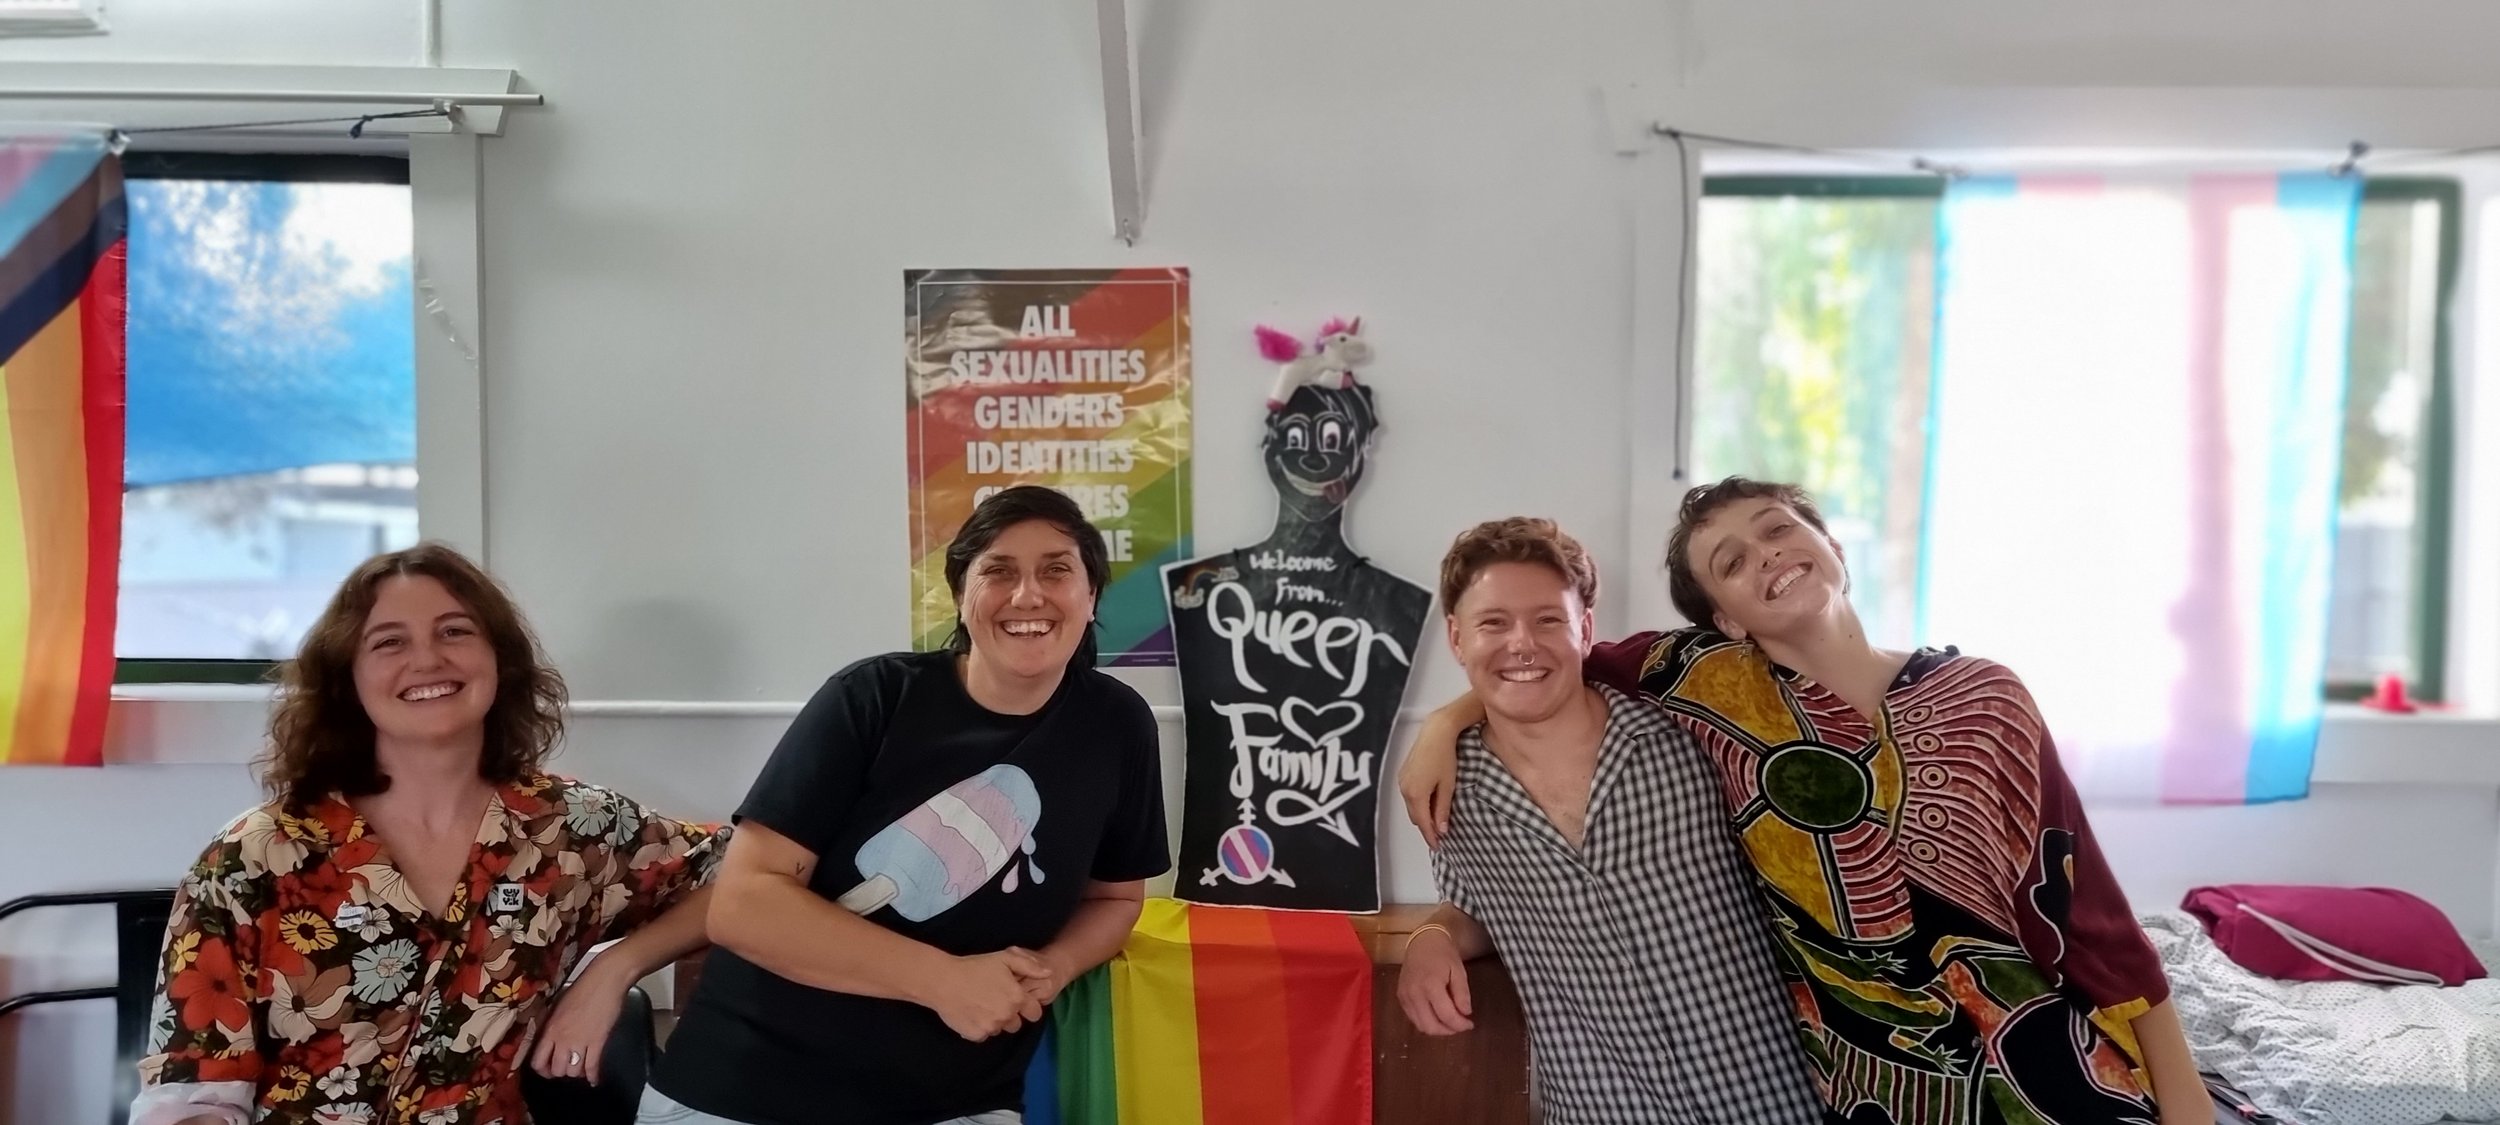 Staff and other Queer workers at a youth event.jpg